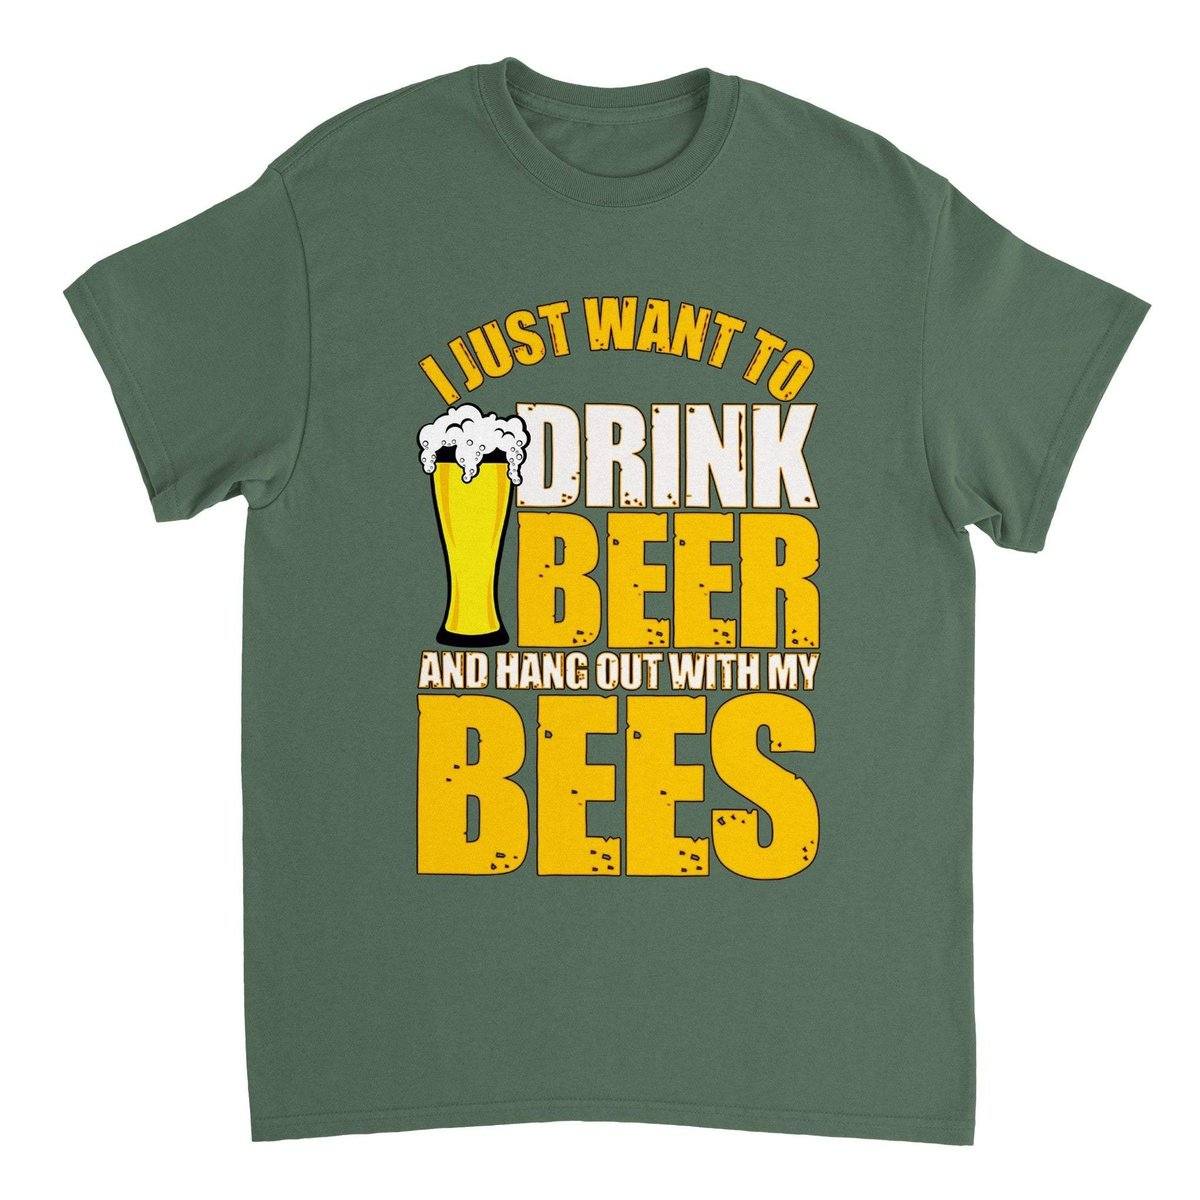 I Just Want To Drink Beer And Hang Out With My Bees T-Shirt - Funny Bee Beer Tshirt - Unisex Crewneck T-shirt Australia Online Color Military Green / S